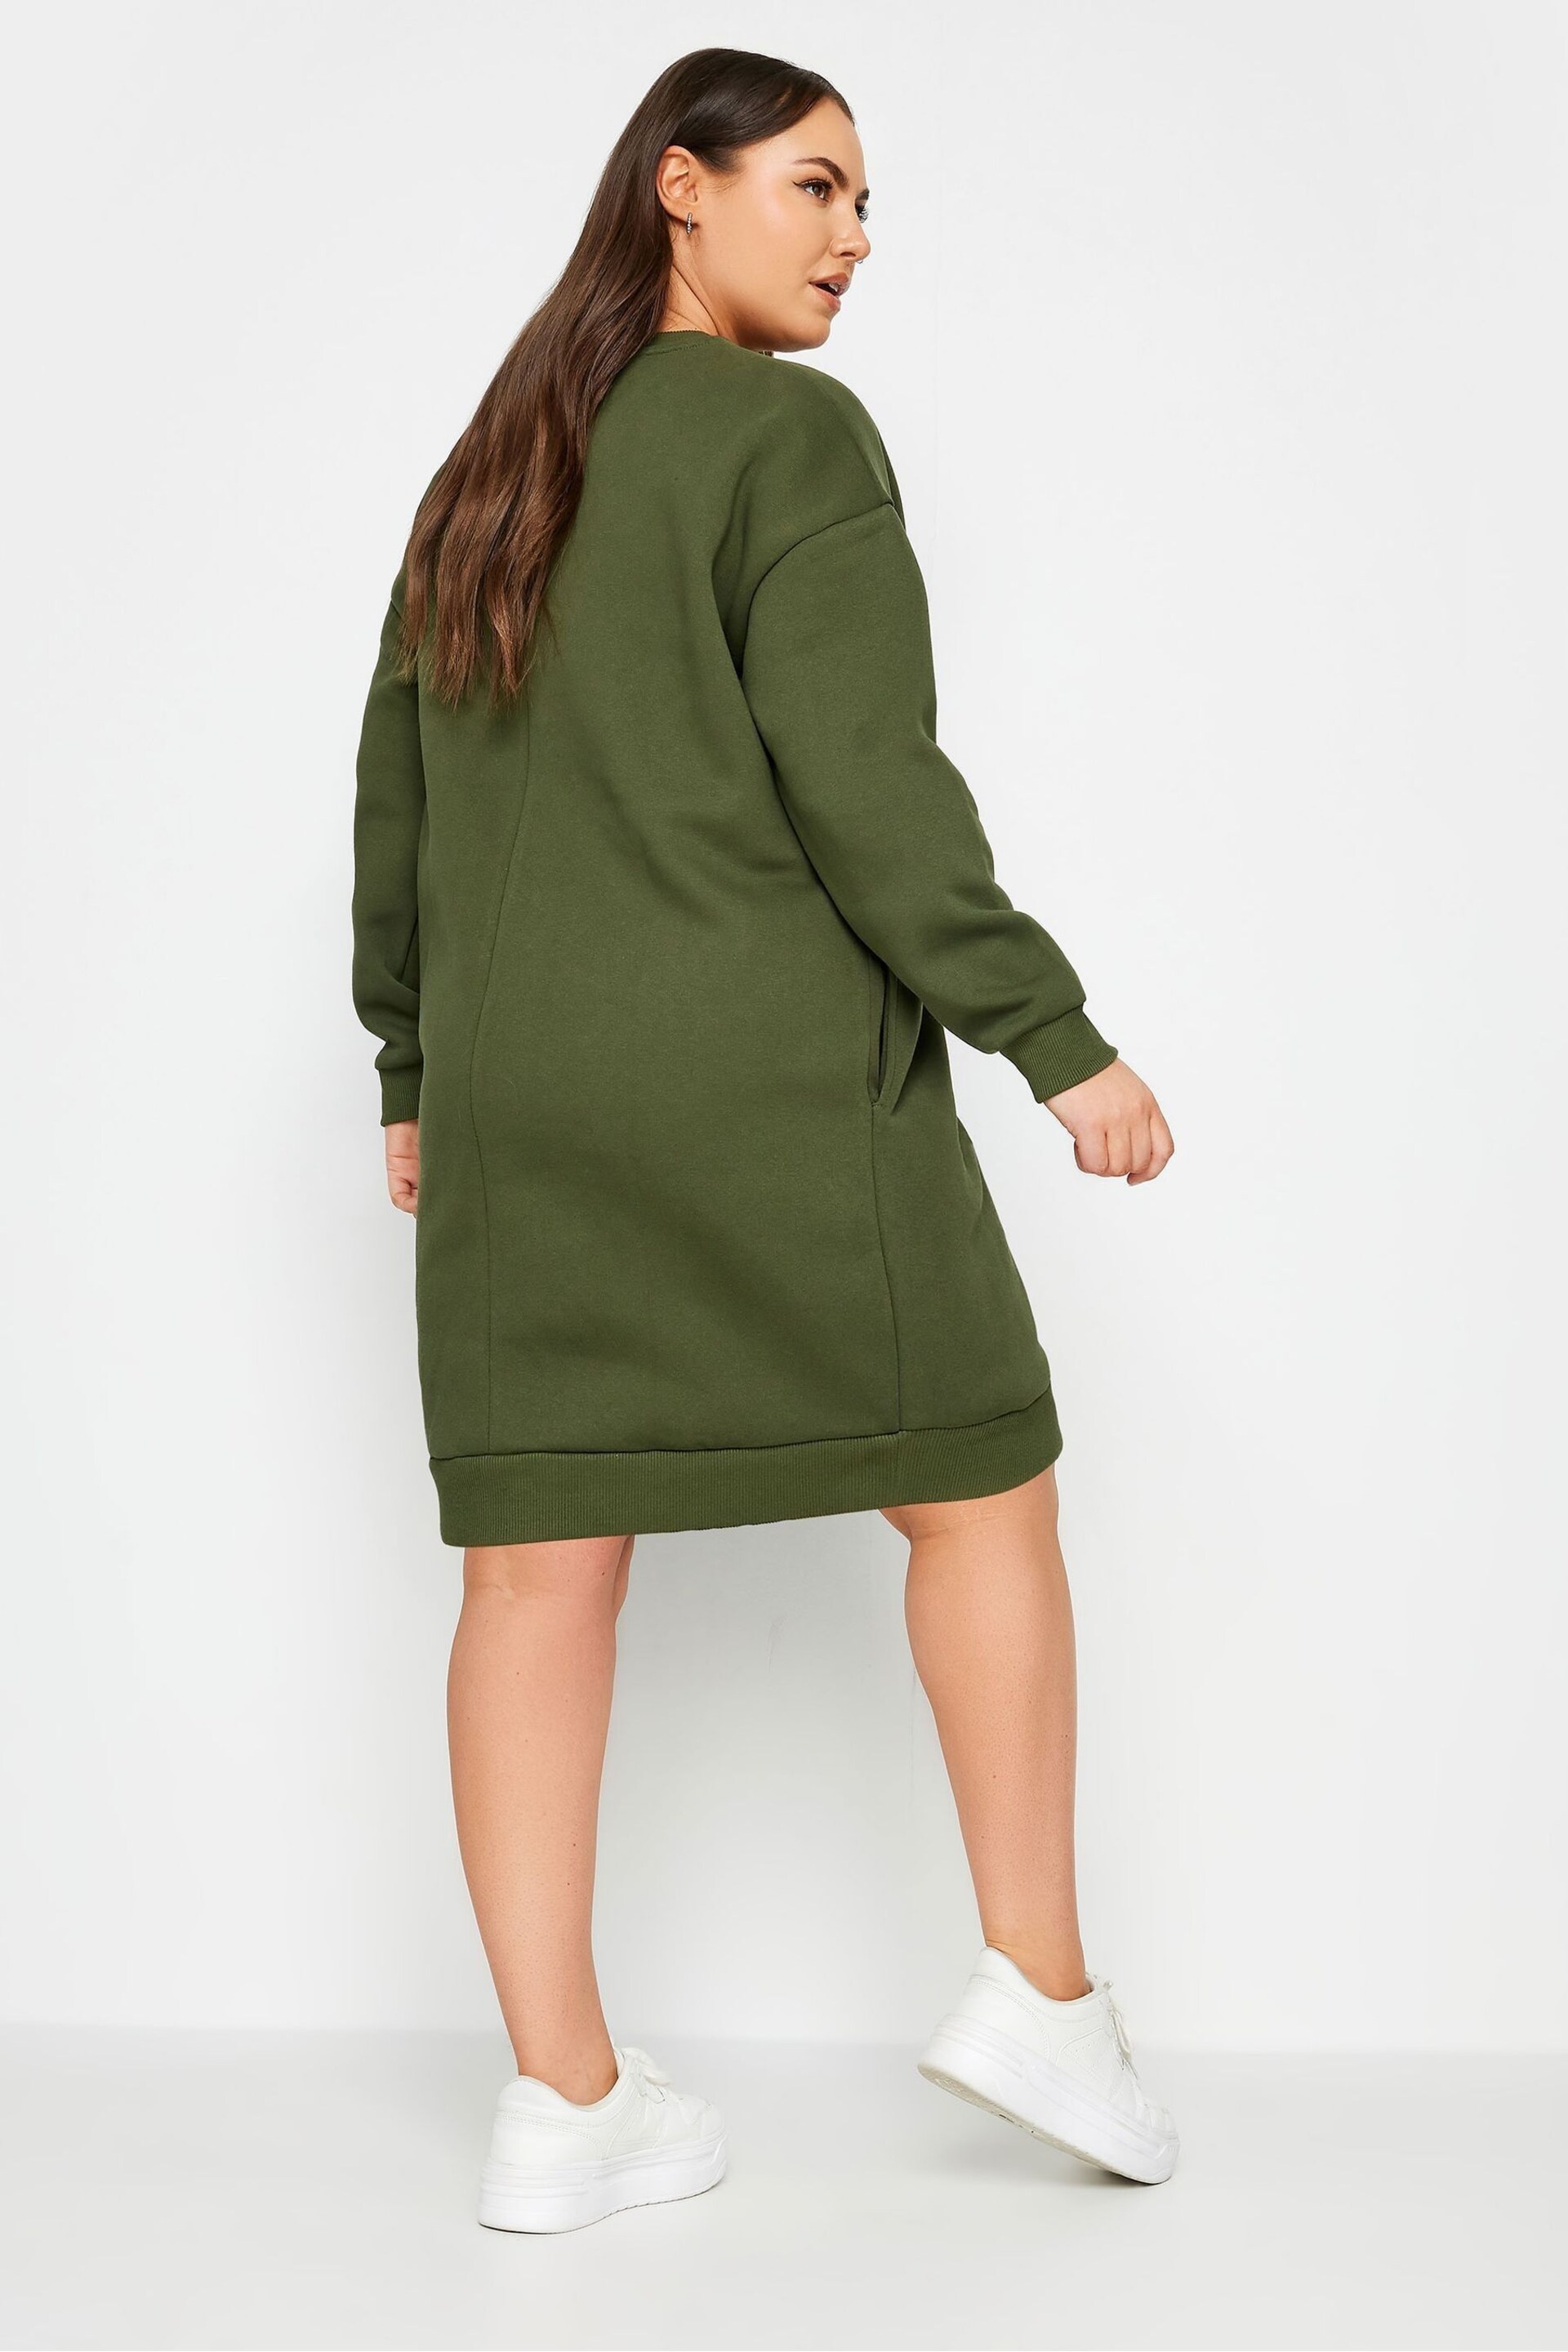 Yours Curve Green Sweat Tunic Dress - Image 3 of 4